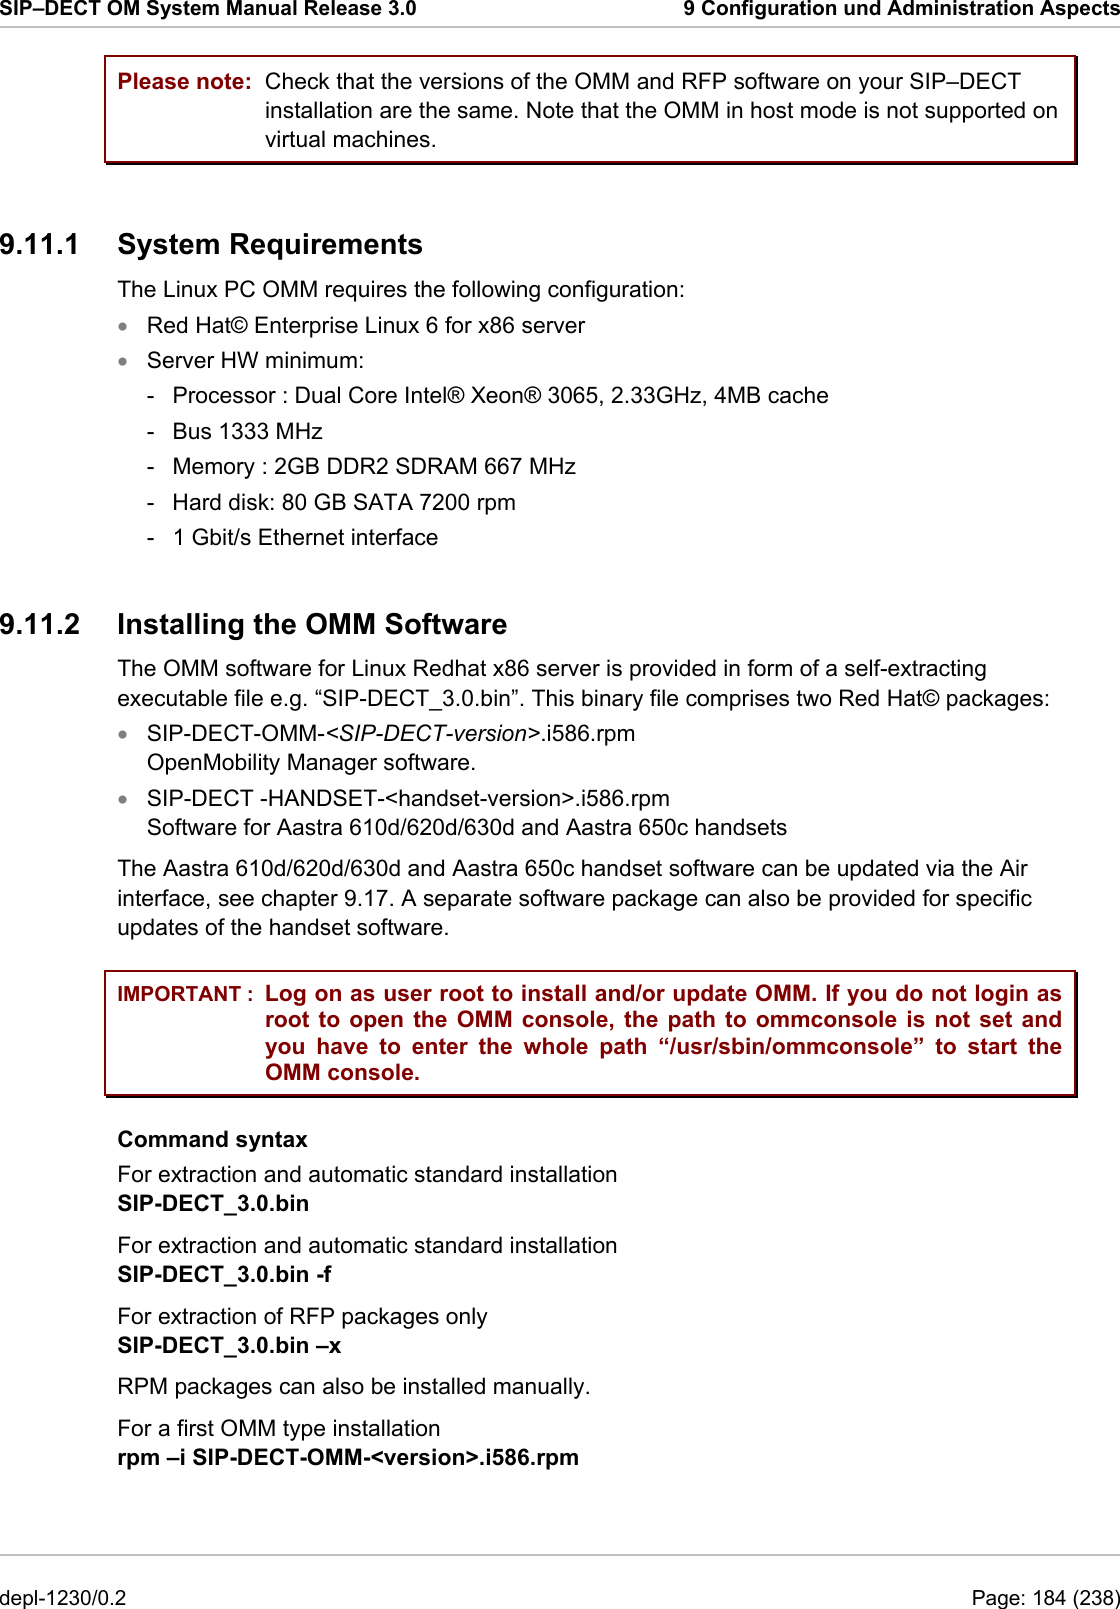 SIP–DECT OM System Manual Release 3.0  9 Configuration und Administration Aspects Please note: IMPORTANT : Check that the versions of the OMM and RFP software on your SIP–DECT installation are the same. Note that the OMM in host mode is not supported on virtual machines. 9.11.1 System Requirements The Linux PC OMM requires the following configuration:  Red Hat© Enterprise Linux 6 for x86 server • • • • Server HW minimum:  -  Processor : Dual Core Intel® Xeon® 3065, 2.33GHz, 4MB cache -  Bus 1333 MHz  -  Memory : 2GB DDR2 SDRAM 667 MHz  -  Hard disk: 80 GB SATA 7200 rpm  -  1 Gbit/s Ethernet interface  9.11.2  Installing the OMM Software The OMM software for Linux Redhat x86 server is provided in form of a self-extracting executable file e.g. “SIP-DECT_3.0.bin”. This binary file comprises two Red Hat© packages: SIP-DECT-OMM-&lt;SIP-DECT-version&gt;.i586.rpm OpenMobility Manager software. SIP-DECT -HANDSET-&lt;handset-version&gt;.i586.rpm Software for Aastra 610d/620d/630d and Aastra 650c handsets The Aastra 610d/620d/630d and Aastra 650c handset software can be updated via the Air interface, see chapter 9.17. A separate software package can also be provided for specific updates of the handset software. Log on as user root to install and/or update OMM. If you do not login as root to open the OMM console, the path to ommconsole is not set and you have to enter the whole path “/usr/sbin/ommconsole” to start the OMM console. Command syntax For extraction and automatic standard installation  SIP-DECT_3.0.bin For extraction and automatic standard installation  SIP-DECT_3.0.bin -f For extraction of RFP packages only  SIP-DECT_3.0.bin –x  RPM packages can also be installed manually.  For a first OMM type installation  rpm –i SIP-DECT-OMM-&lt;version&gt;.i586.rpm depl-1230/0.2  Page: 184 (238) 